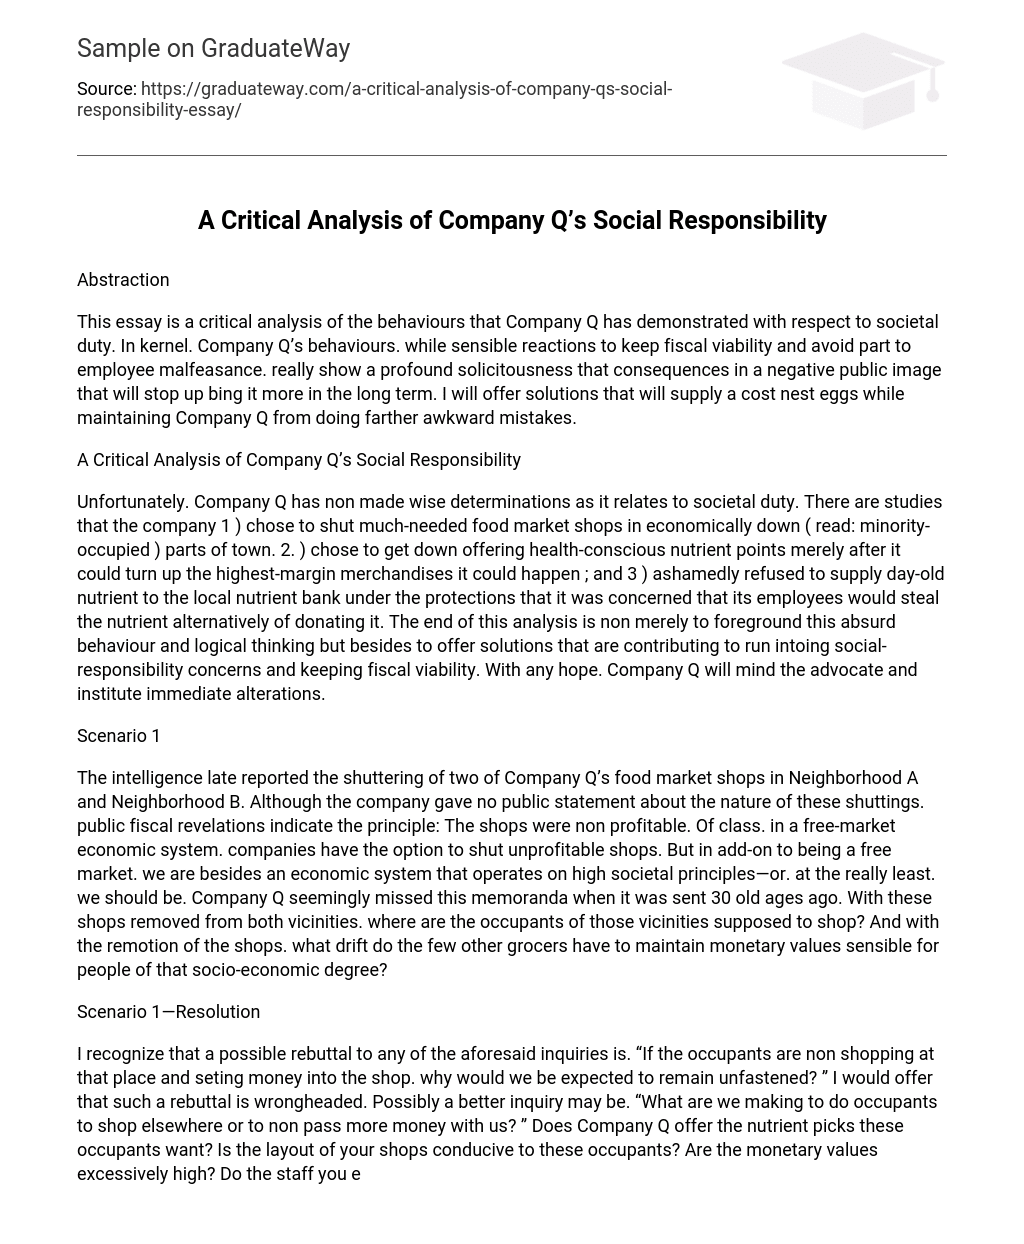 A Critical Analysis of Company Q’s Social Responsibility